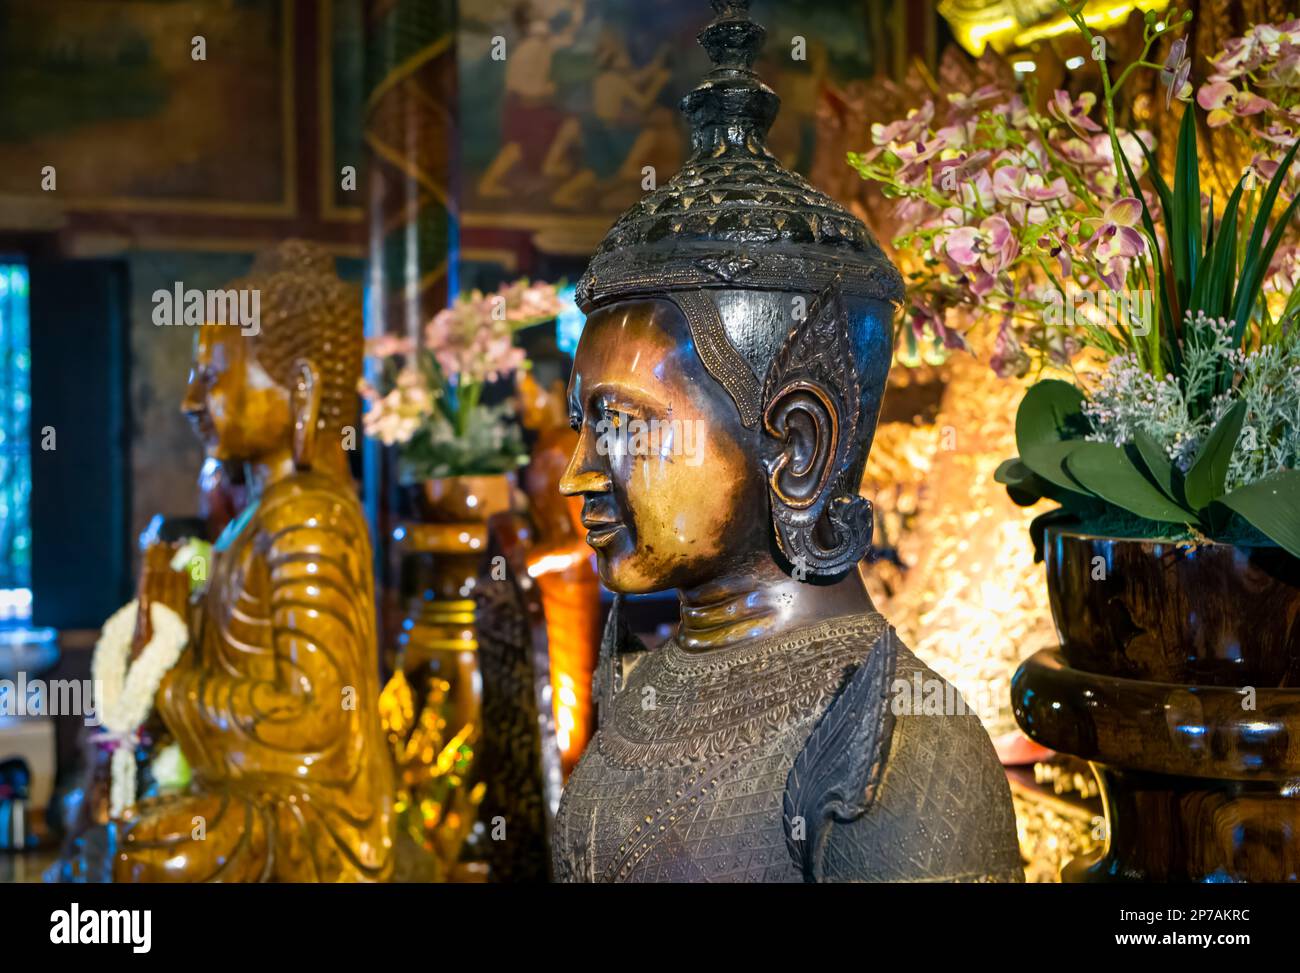 Statues within the main alter at the ancient buddhist Wat Phnom in Phnom Penh, Cambodia. Stock Photo